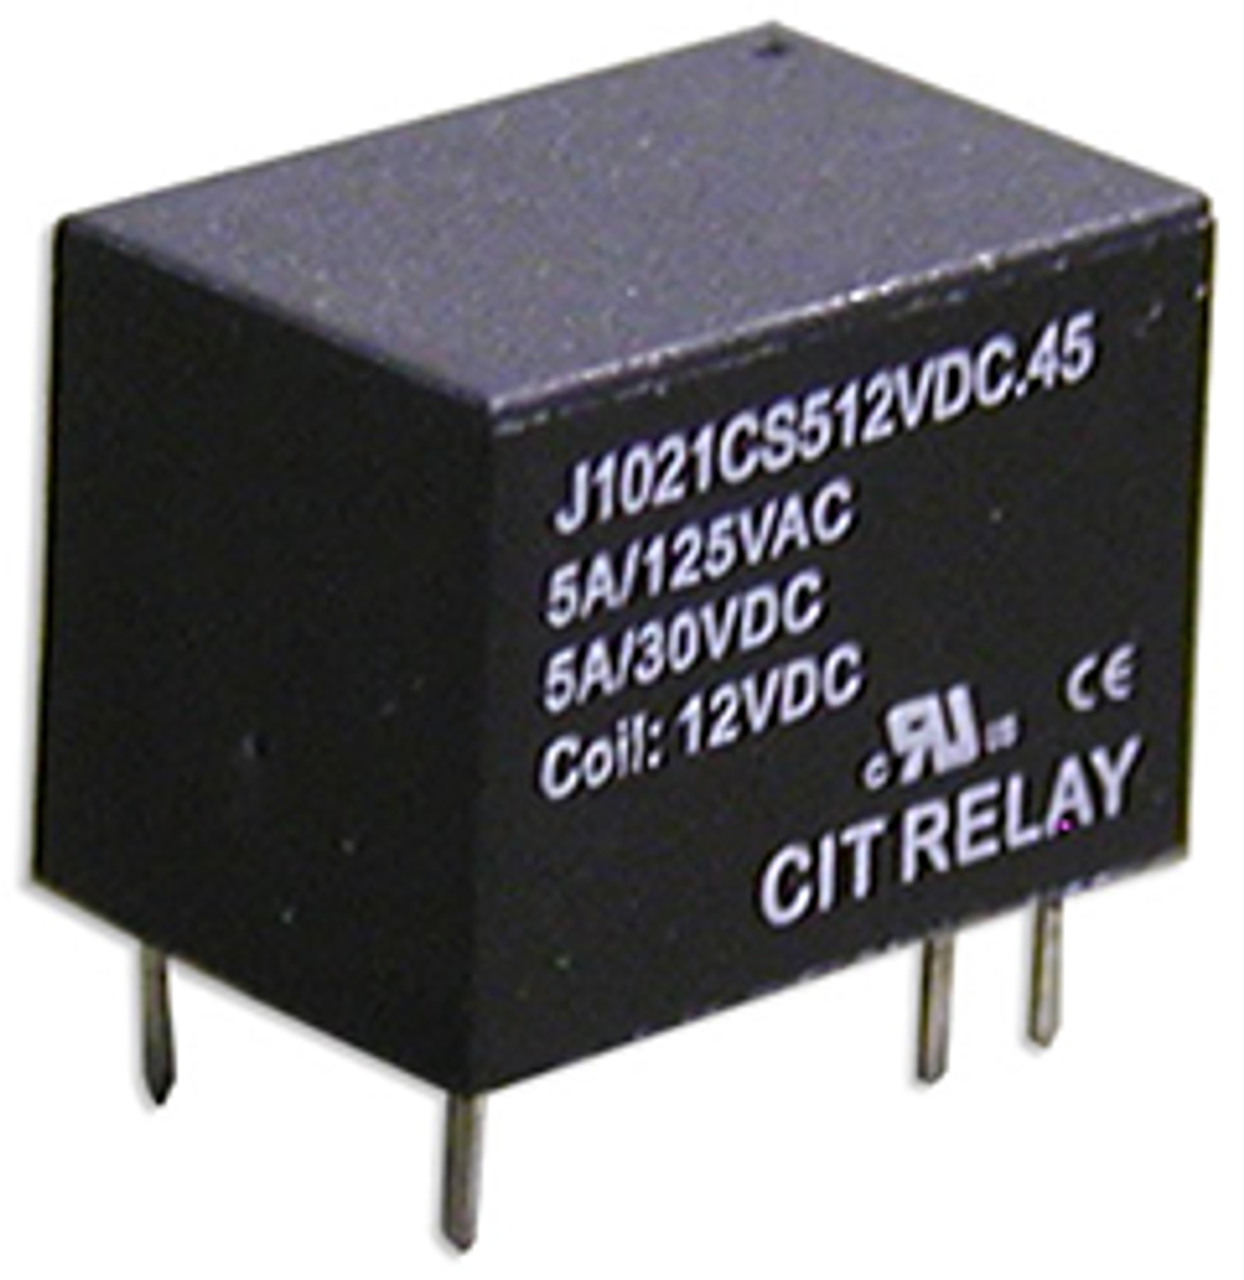 CIT Relay and Switch J1021BS56VDC.45 Power Relays